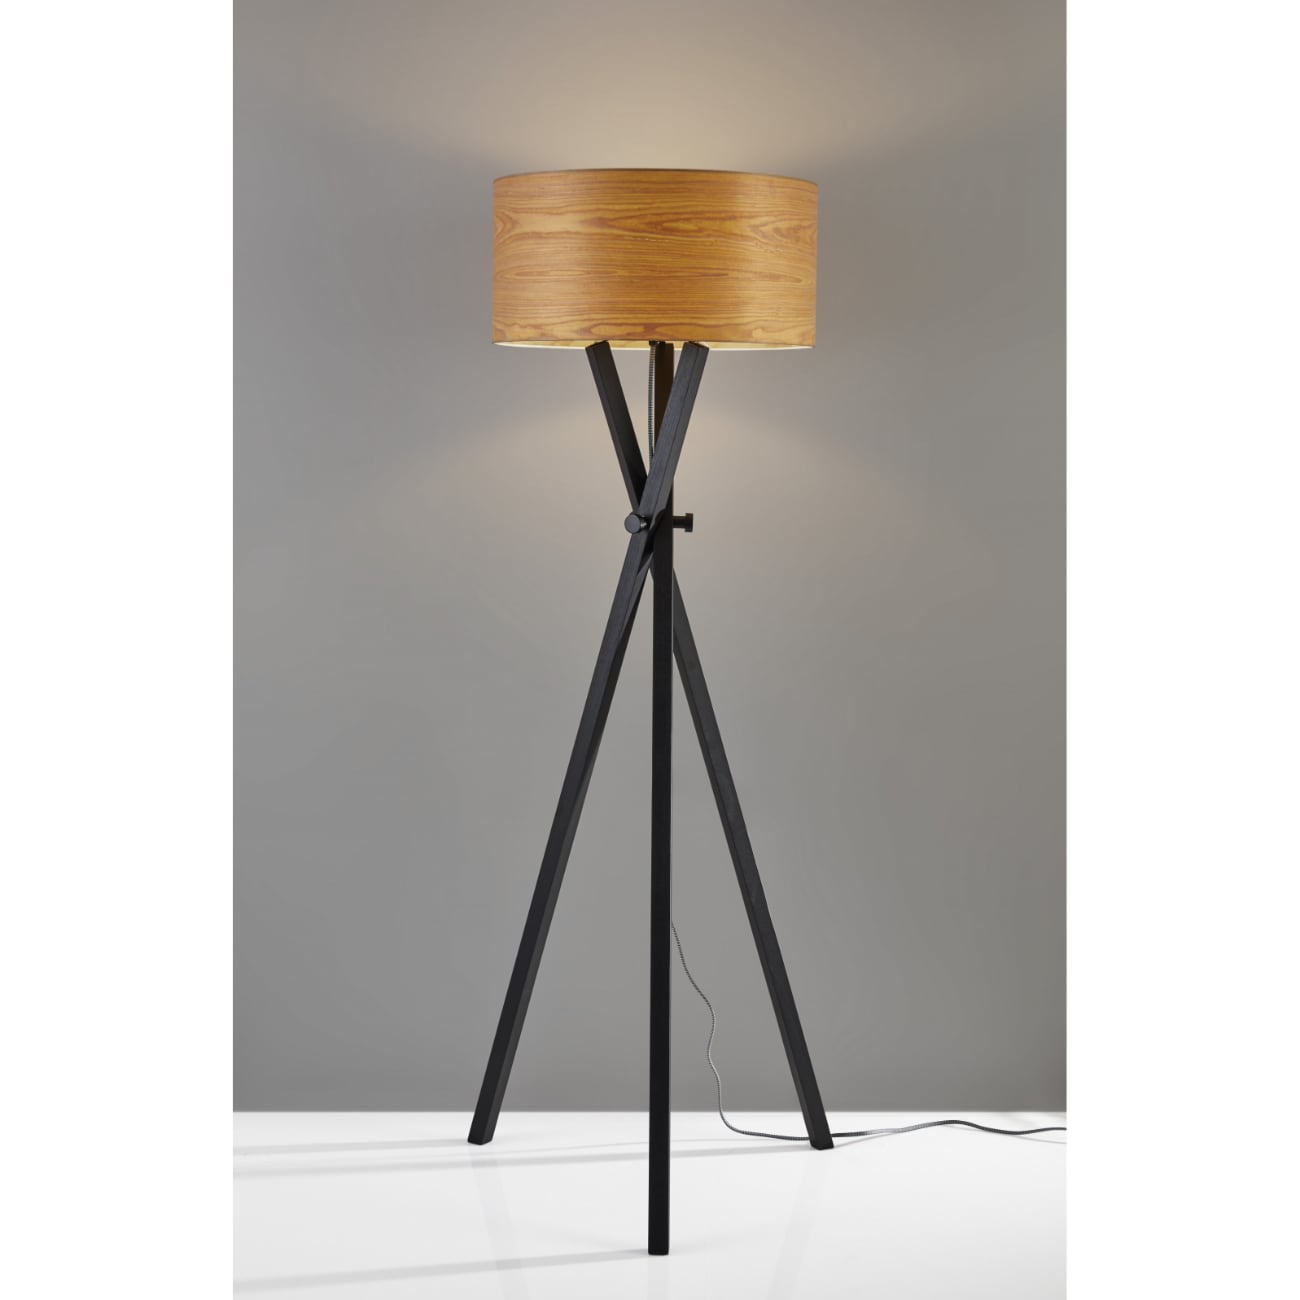 HomeRoots Architectonic Black Wood Tripod Floor Lamp with Wood Grain Shade in the Floor Lamps department at Lowes.com